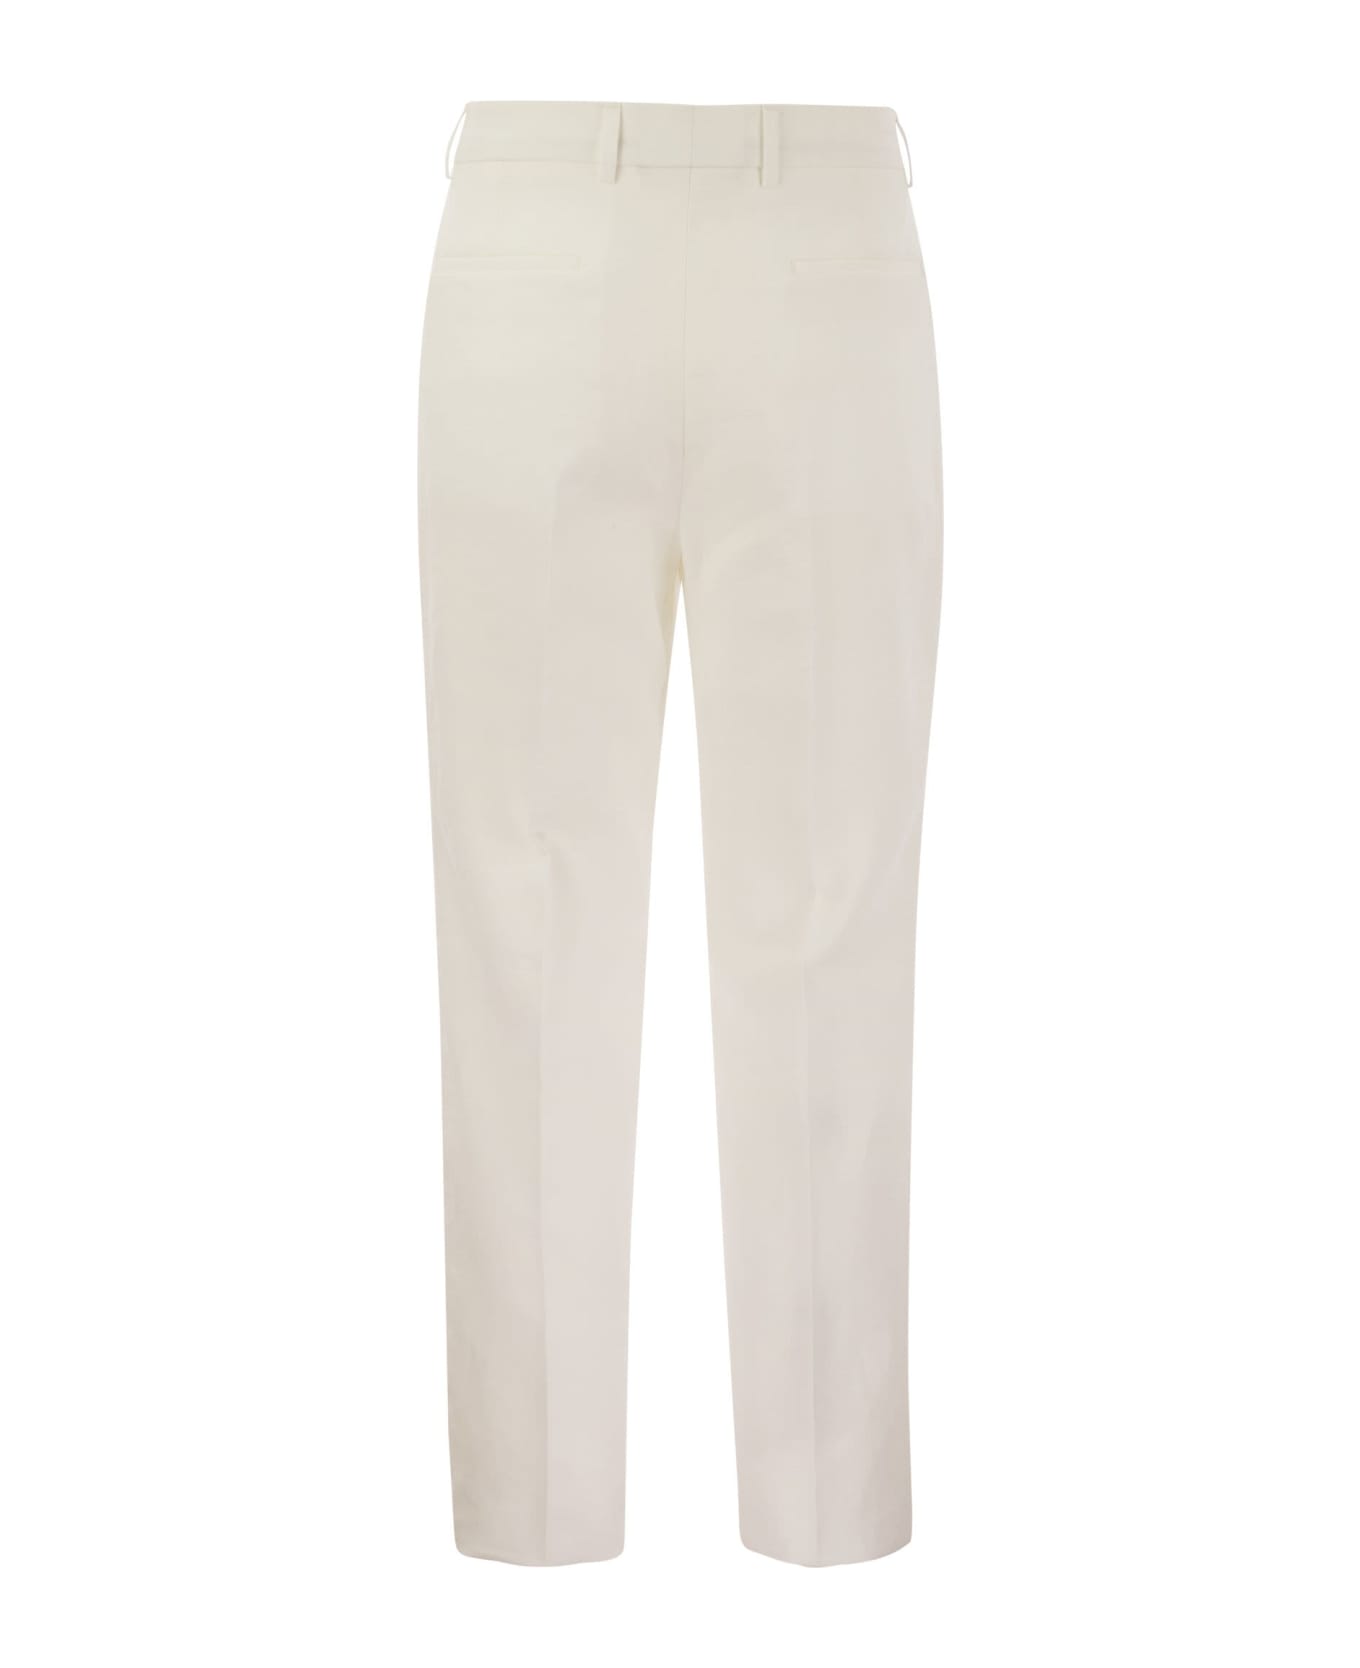 Brunello Cucinelli Leisure Fit Linen Trousers With Darts - Cream ボトムス